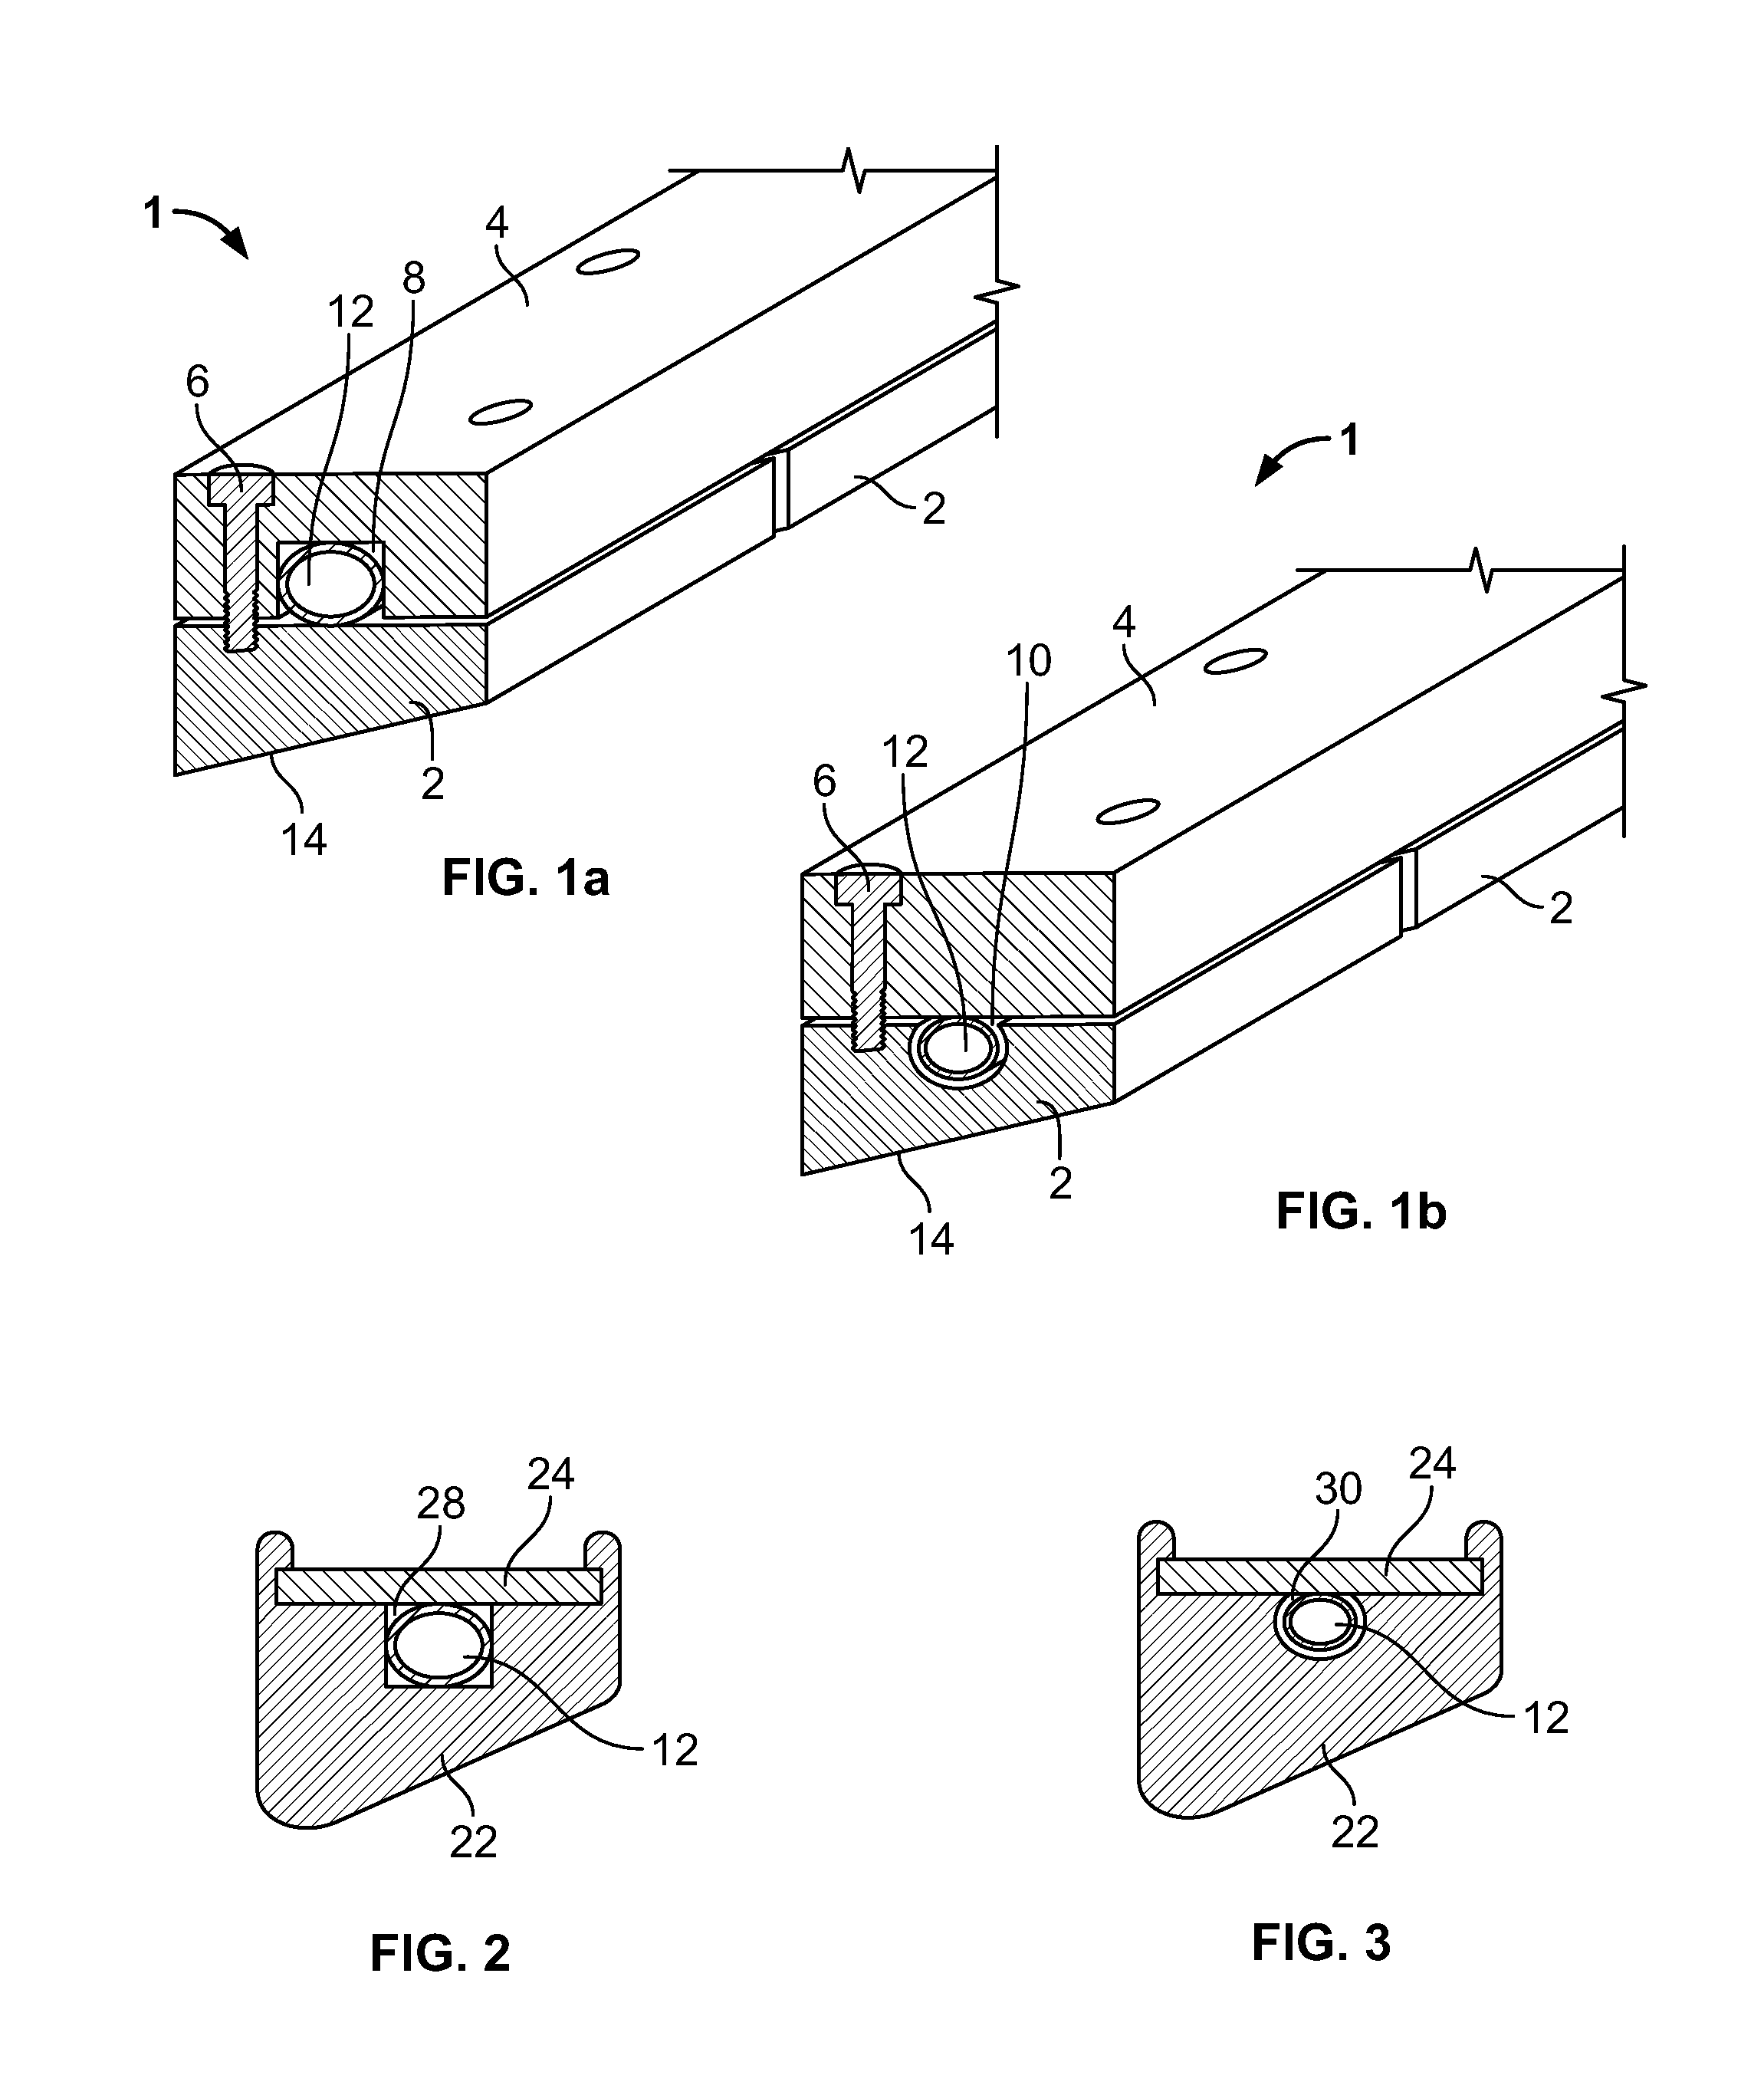 X-ray tube anode comprising a coolant tube